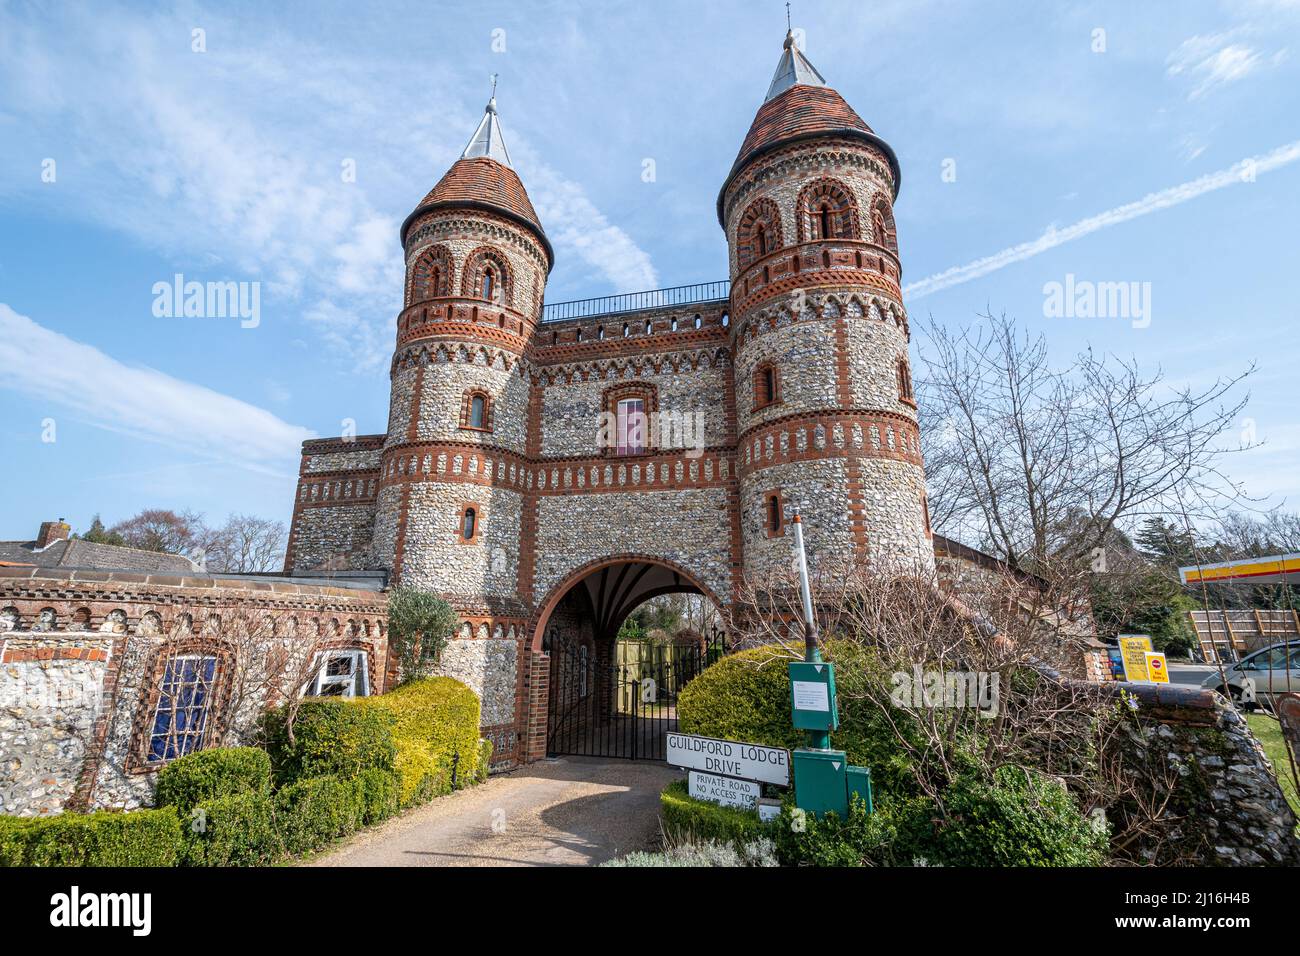 Former gatehouse to Horsley Towers and estate, East Horsley, Surrey, England, UK. The gatehouse is flint and red brick with mock-medieval turrets. Stock Photo